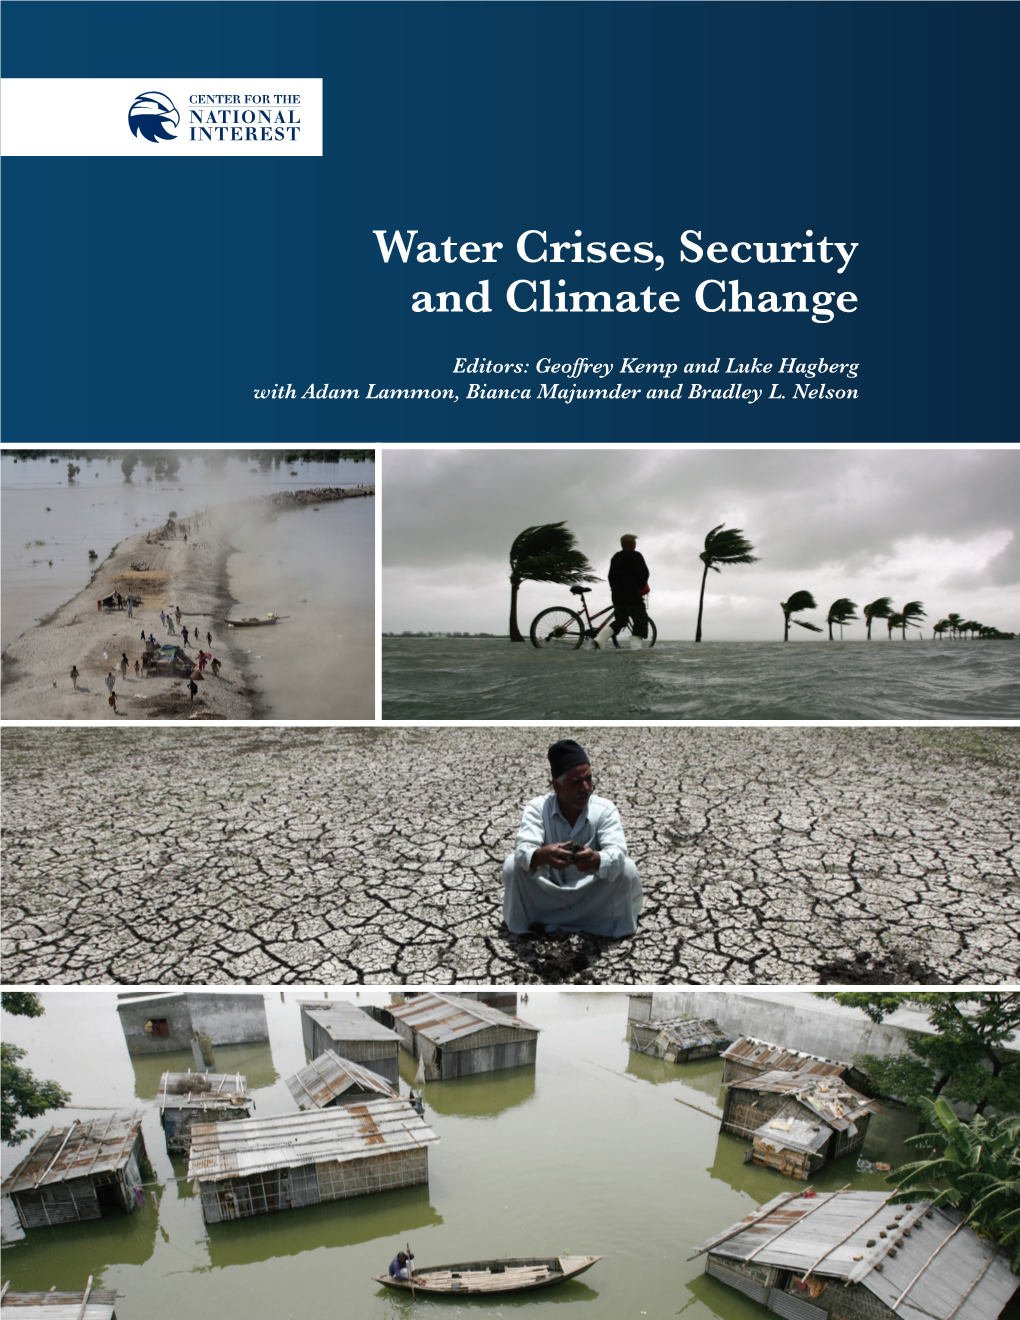 Water Crises, Security and Climate Change with Adam Lammon, Bianca Majumder and Bradley L